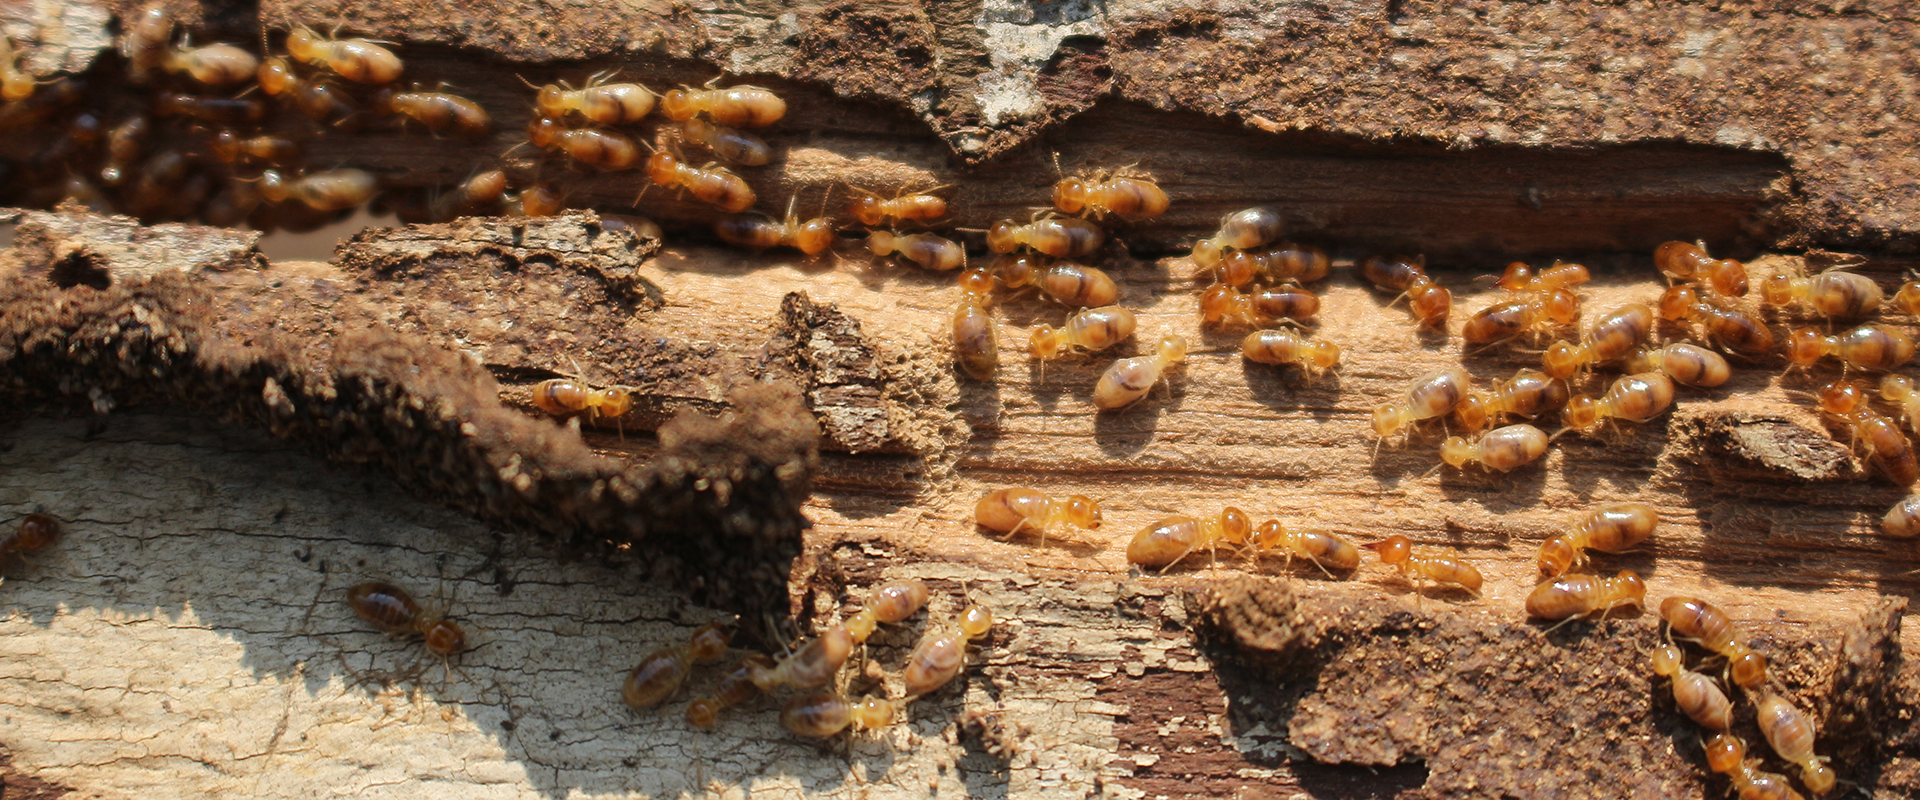 termites on a rotting piece of wood